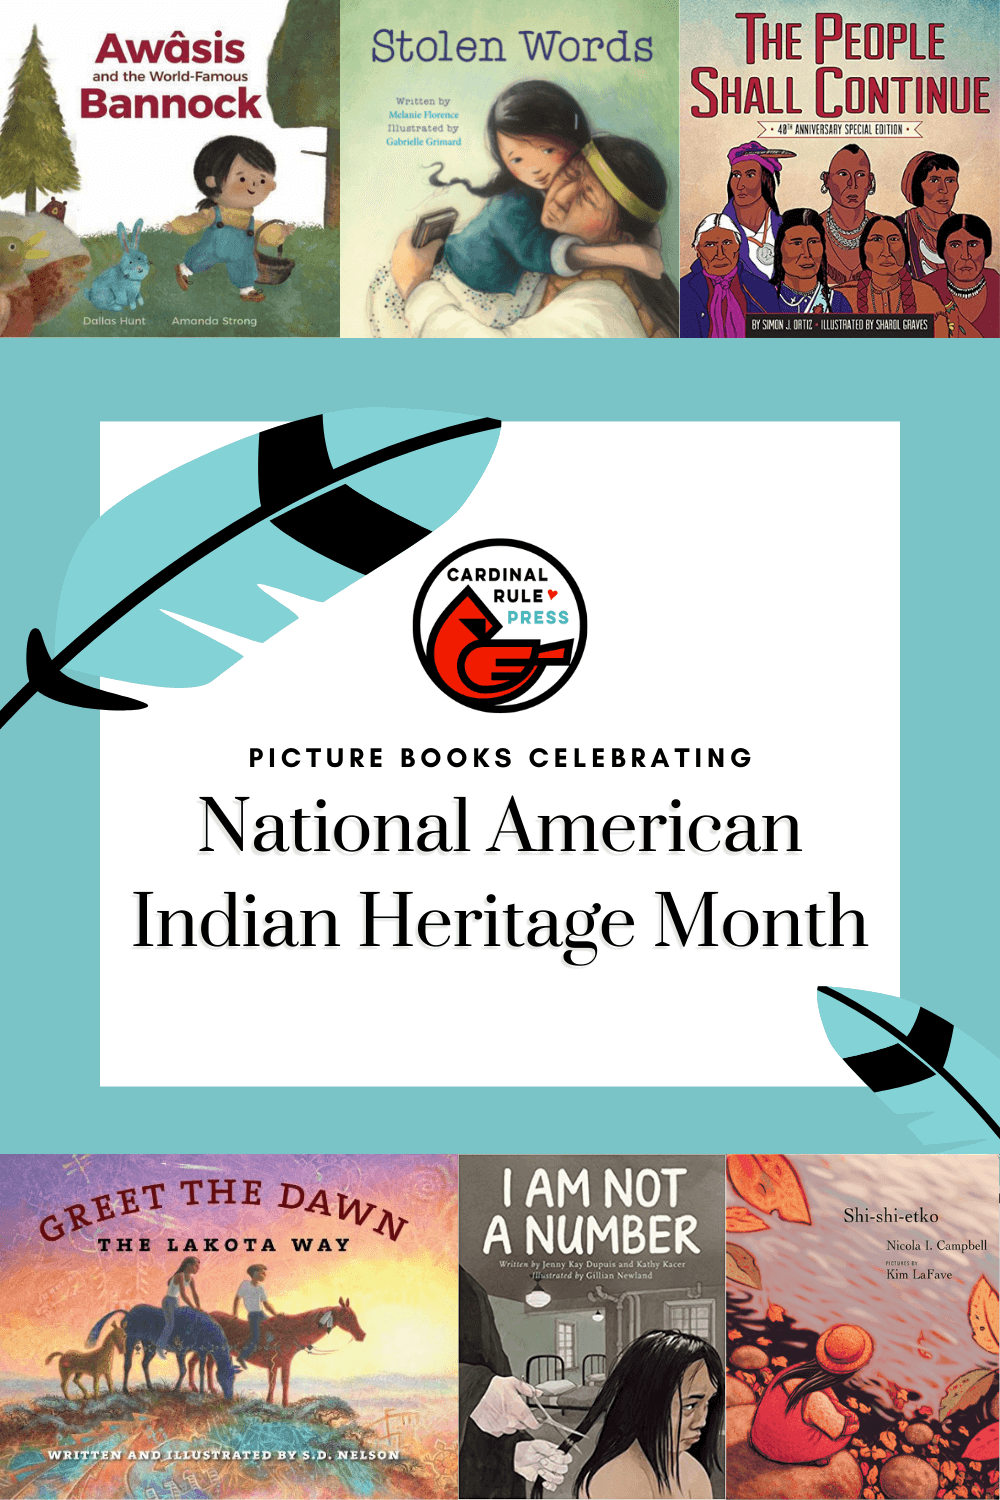 Picture Books Celebrating National American Indian Heritage Month. Celebrating tradition and family, acknowledging history, and looking forward to a better future. #PictureBooks ChildrensBooks #NationalAmericanIndianHeritageMonth